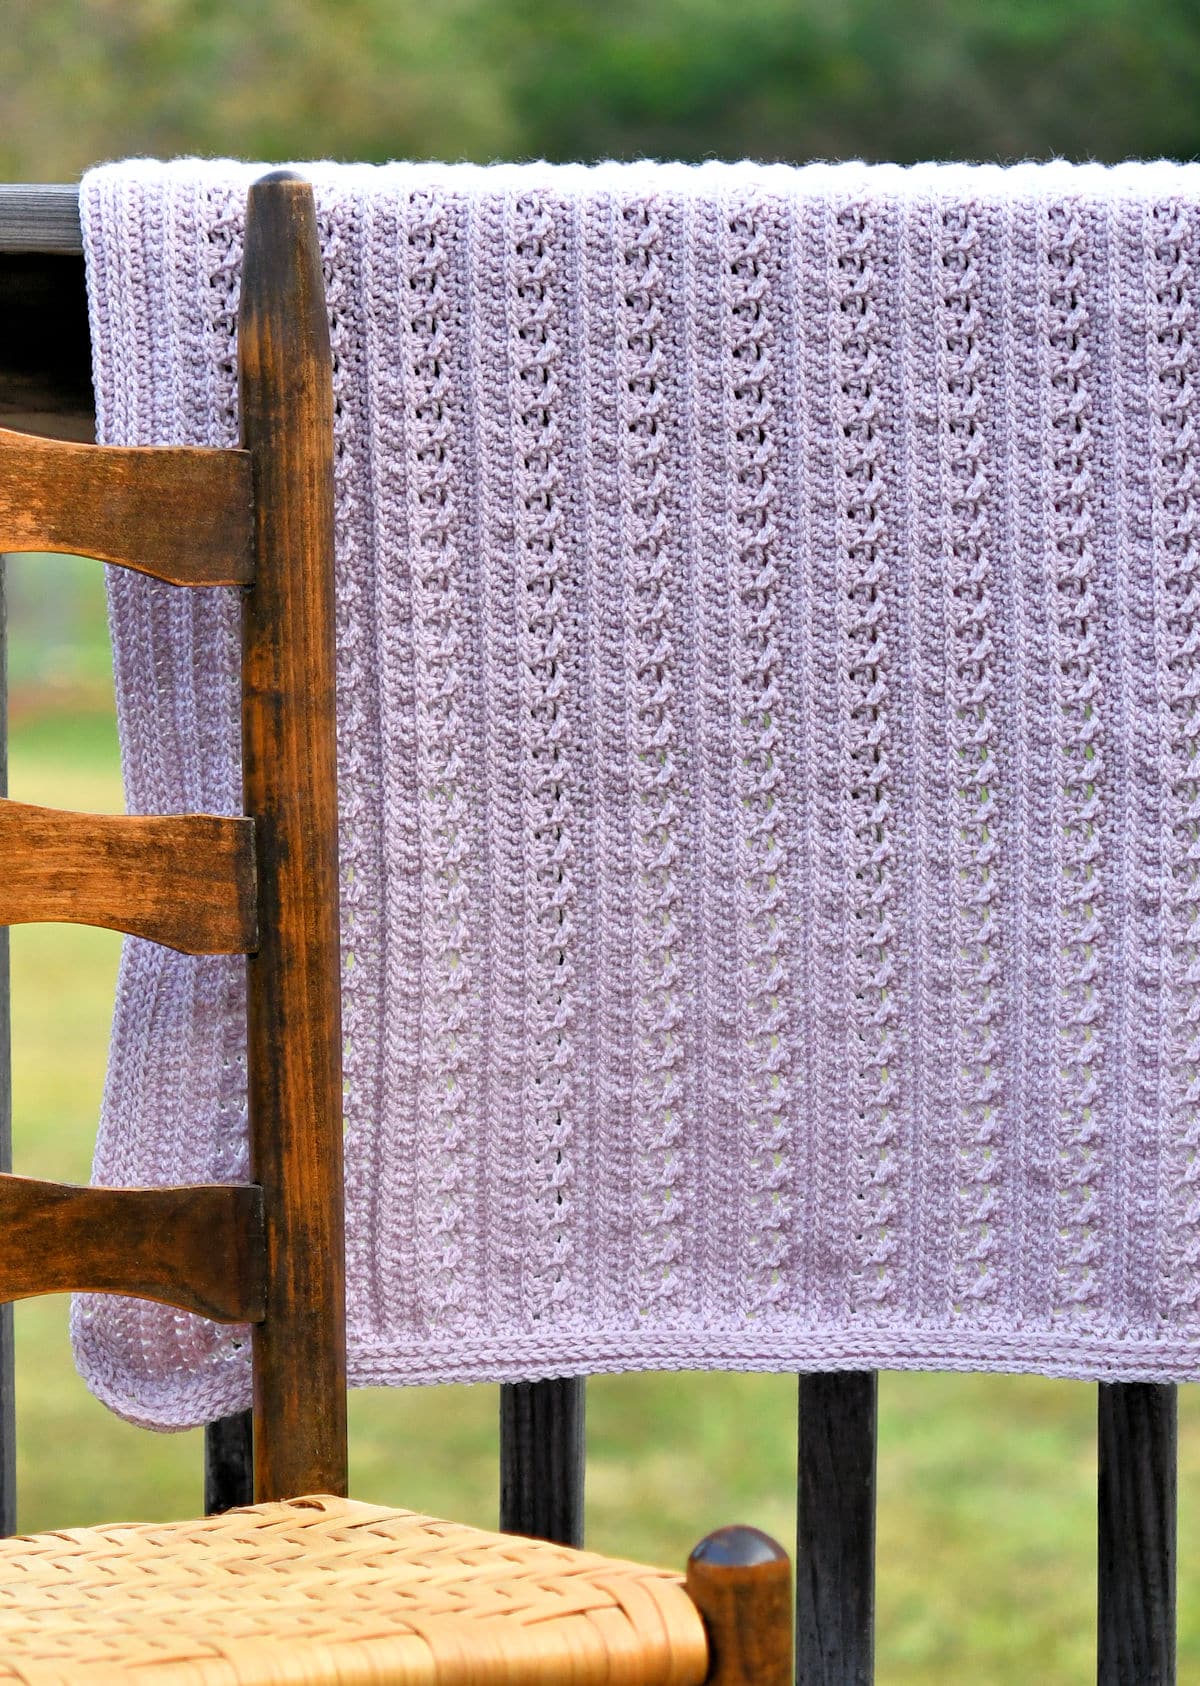 lightweight delicate lace baby blanket draped over a wooden fence